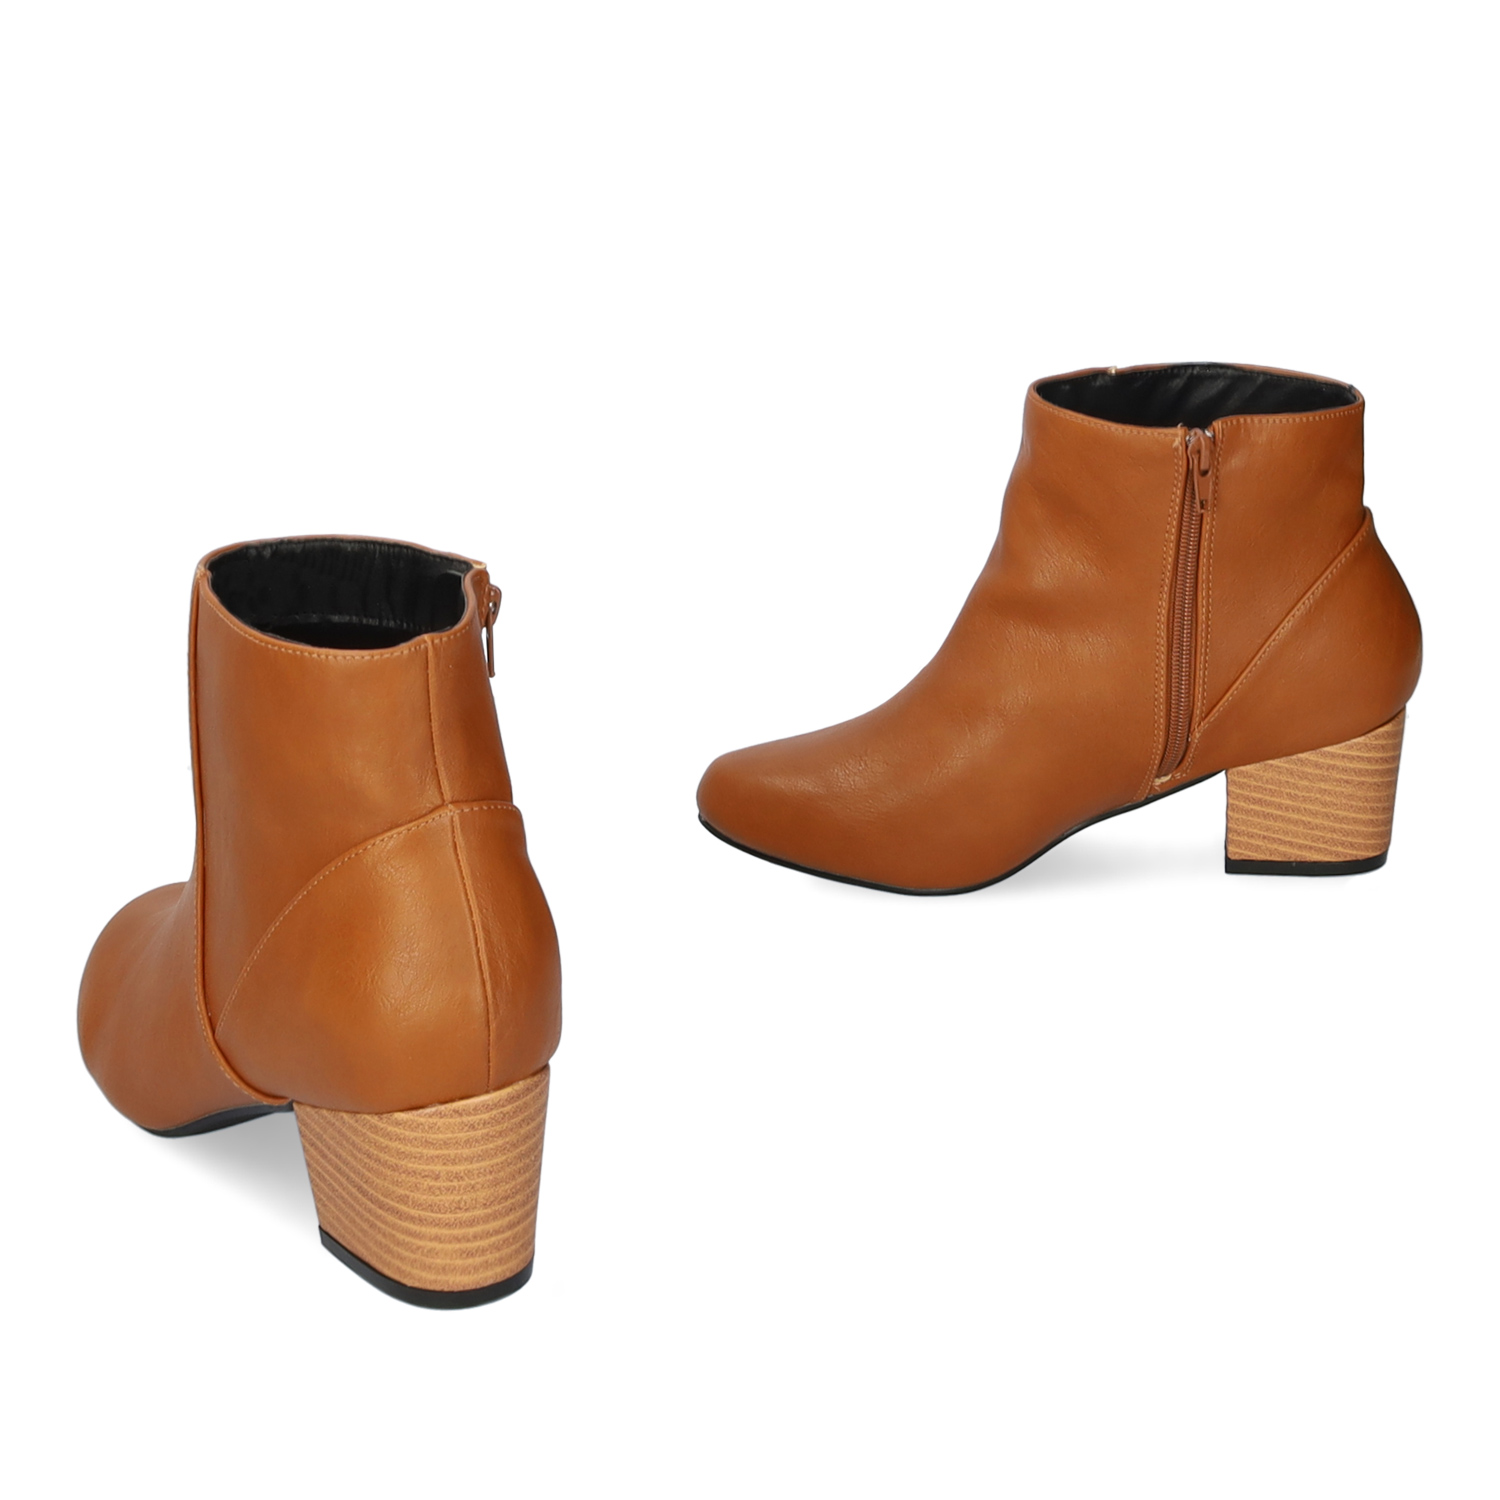 Heeled booties in camel colored faux leather 